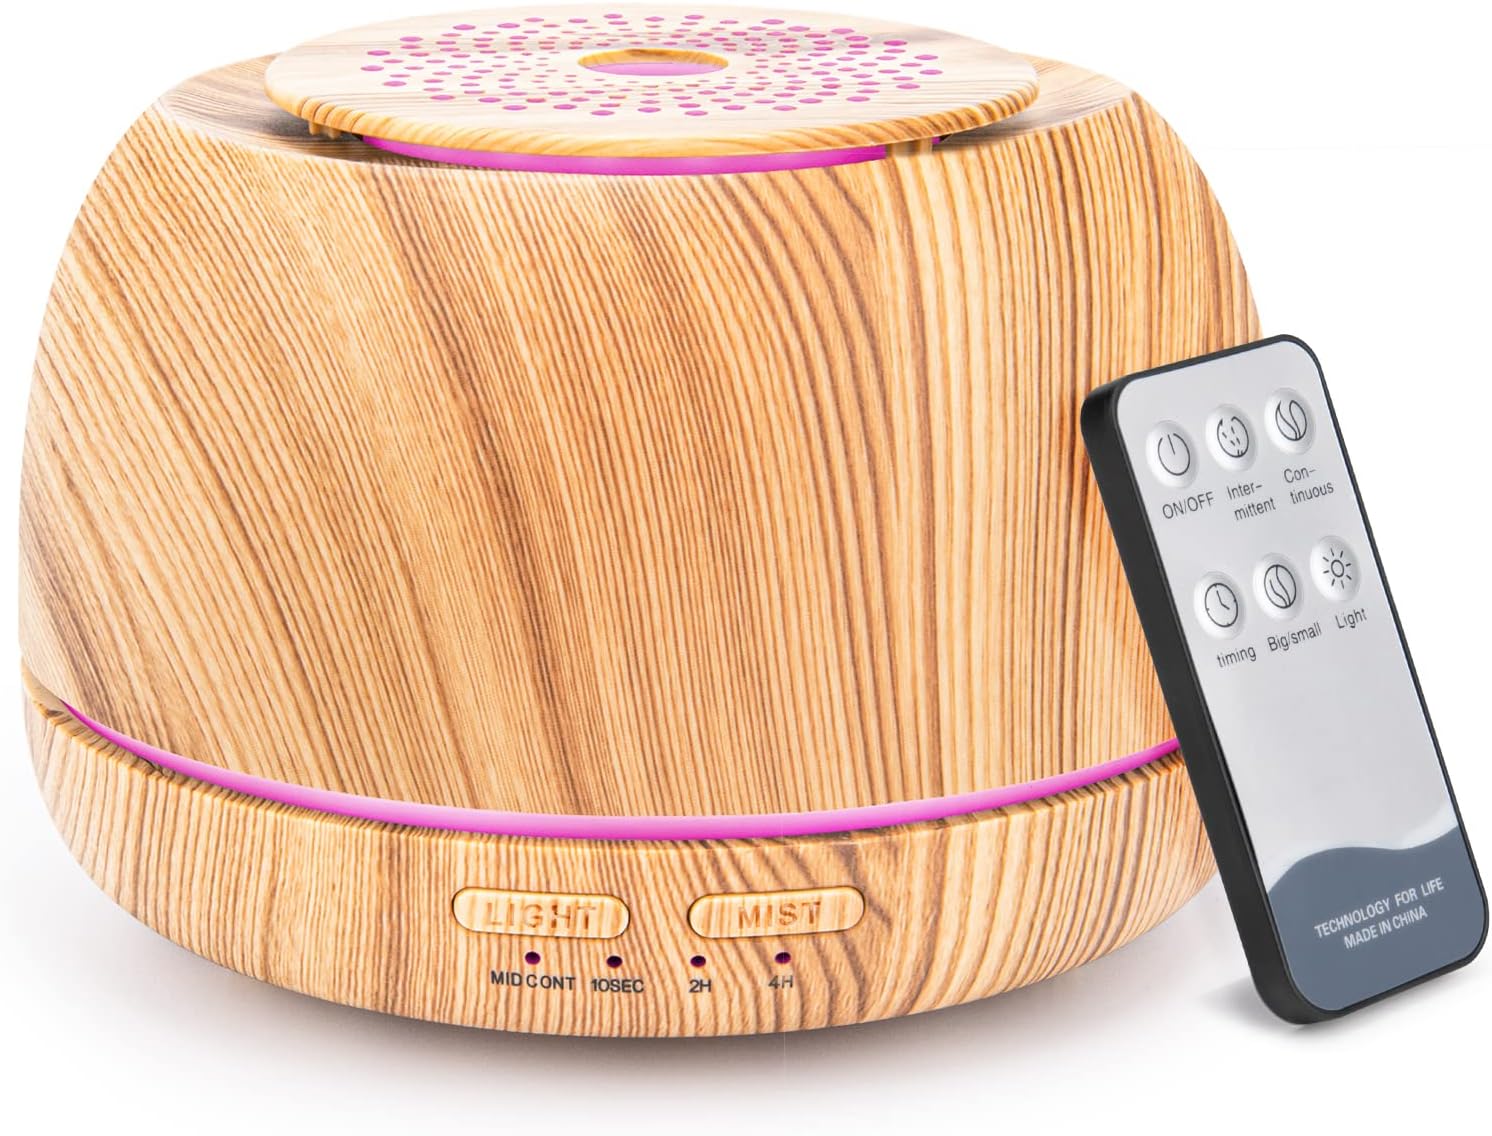 I love the look of this essential oil diffuser. Ive never owned one before so, it seemed like the perfect size to start with. Its perfect size a bedside table and the usb plug in is handy since my bedside lamp has a usb port. The light feature is nice and its got 4 different mist settings. Continuous, 10 sec, 2hr and 4hr. I leave it on the 10 sec setting, it seems to last 8 hours if not more.I bought a set of 8 essential oil scents and have tried 2 of them at least but, this diffuser just doe